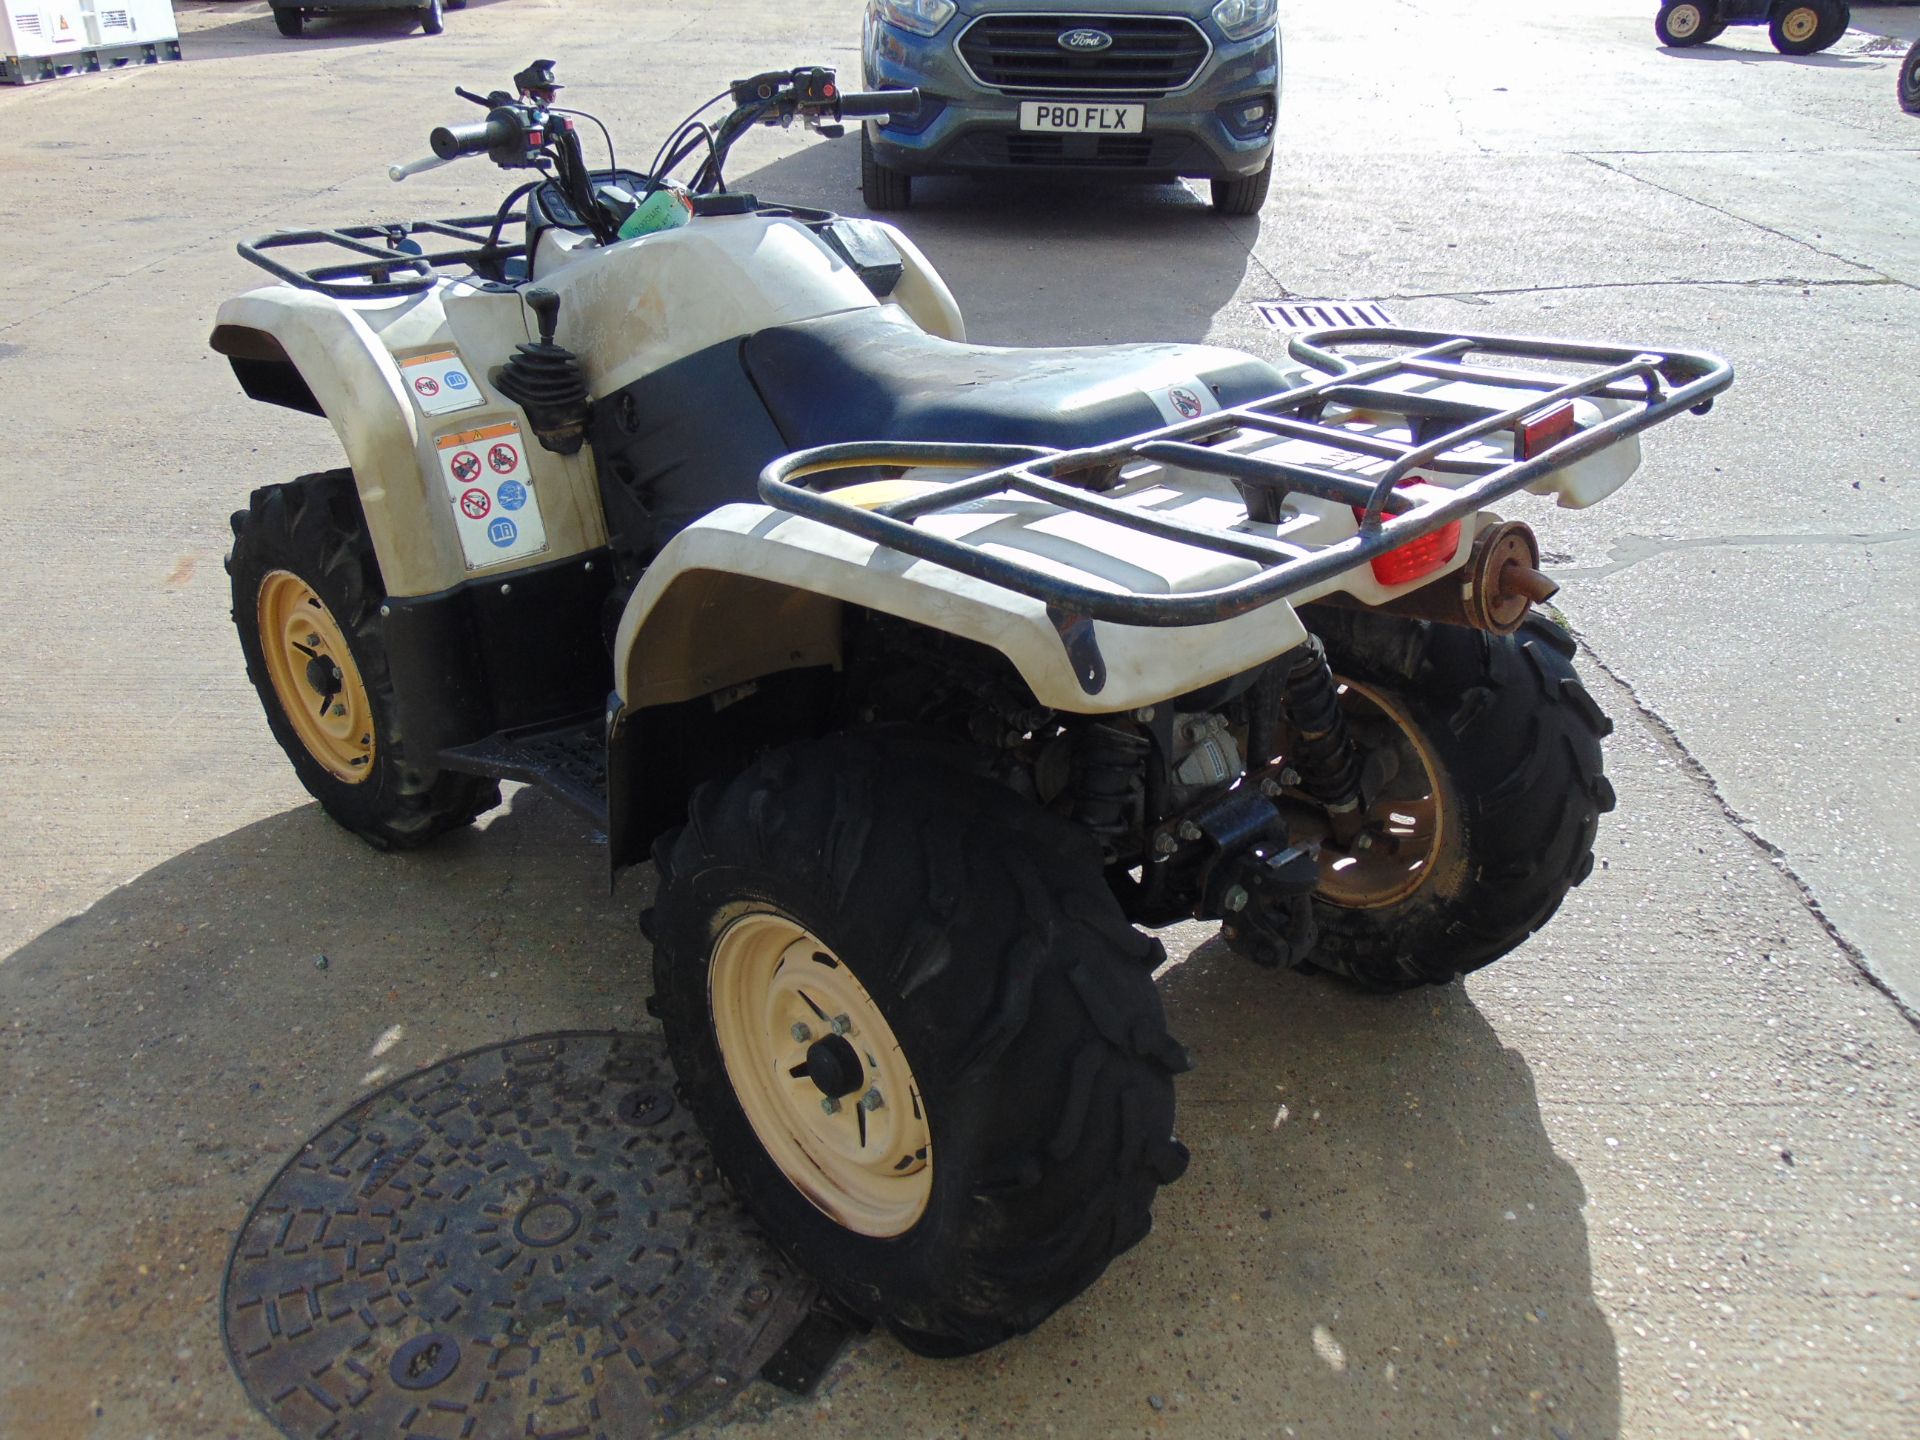 Military Specification Yamaha Grizzly 450 4 x 4 ATV Quad Bike - Image 8 of 16